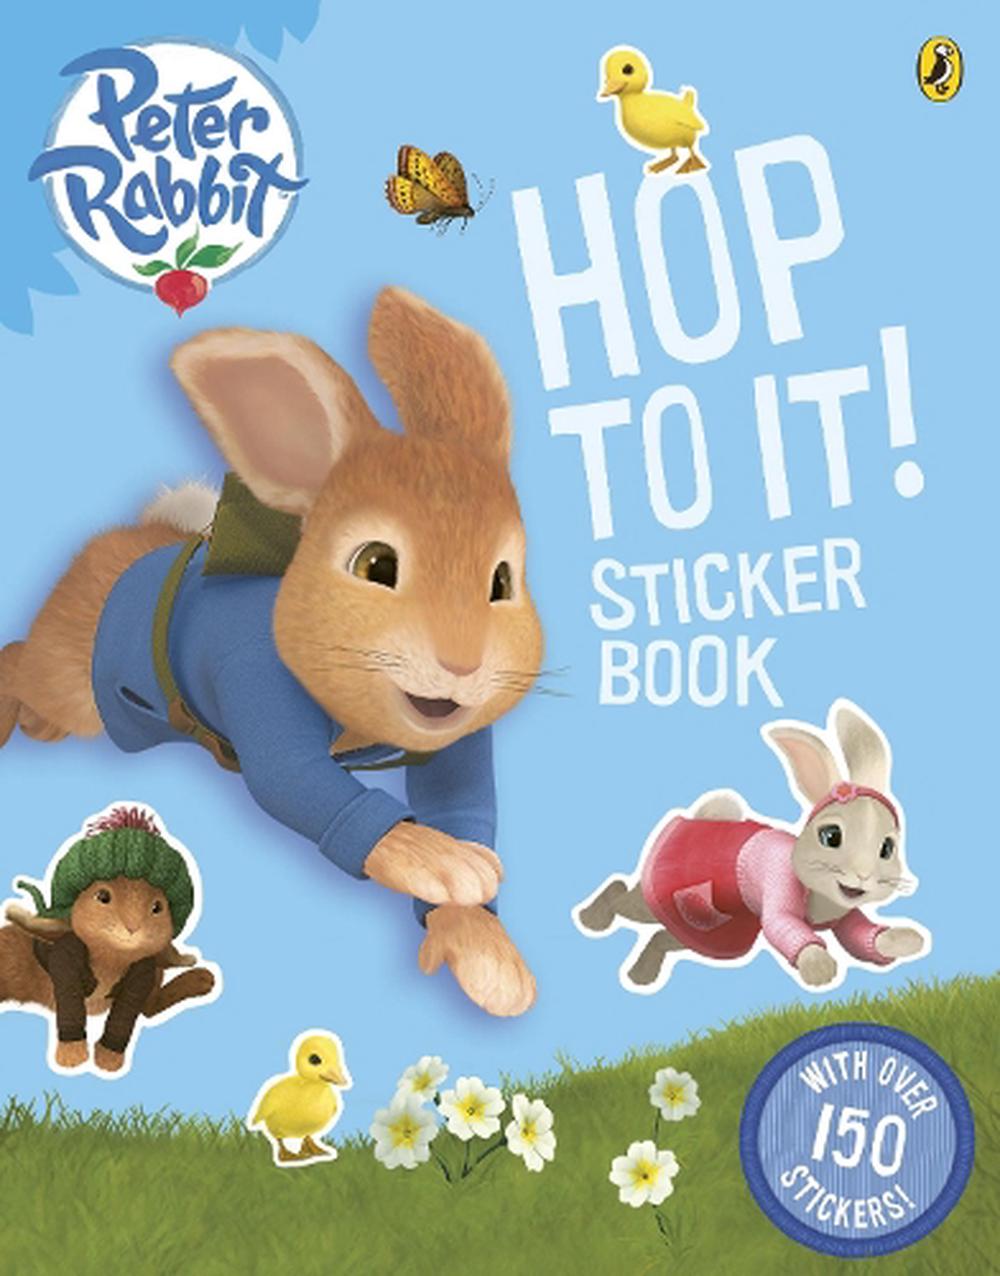 Peter Rabbit Animation: Hop to it! Sticker Book by Puffin, Paperback,  9780723295372 | Buy online at The Nile